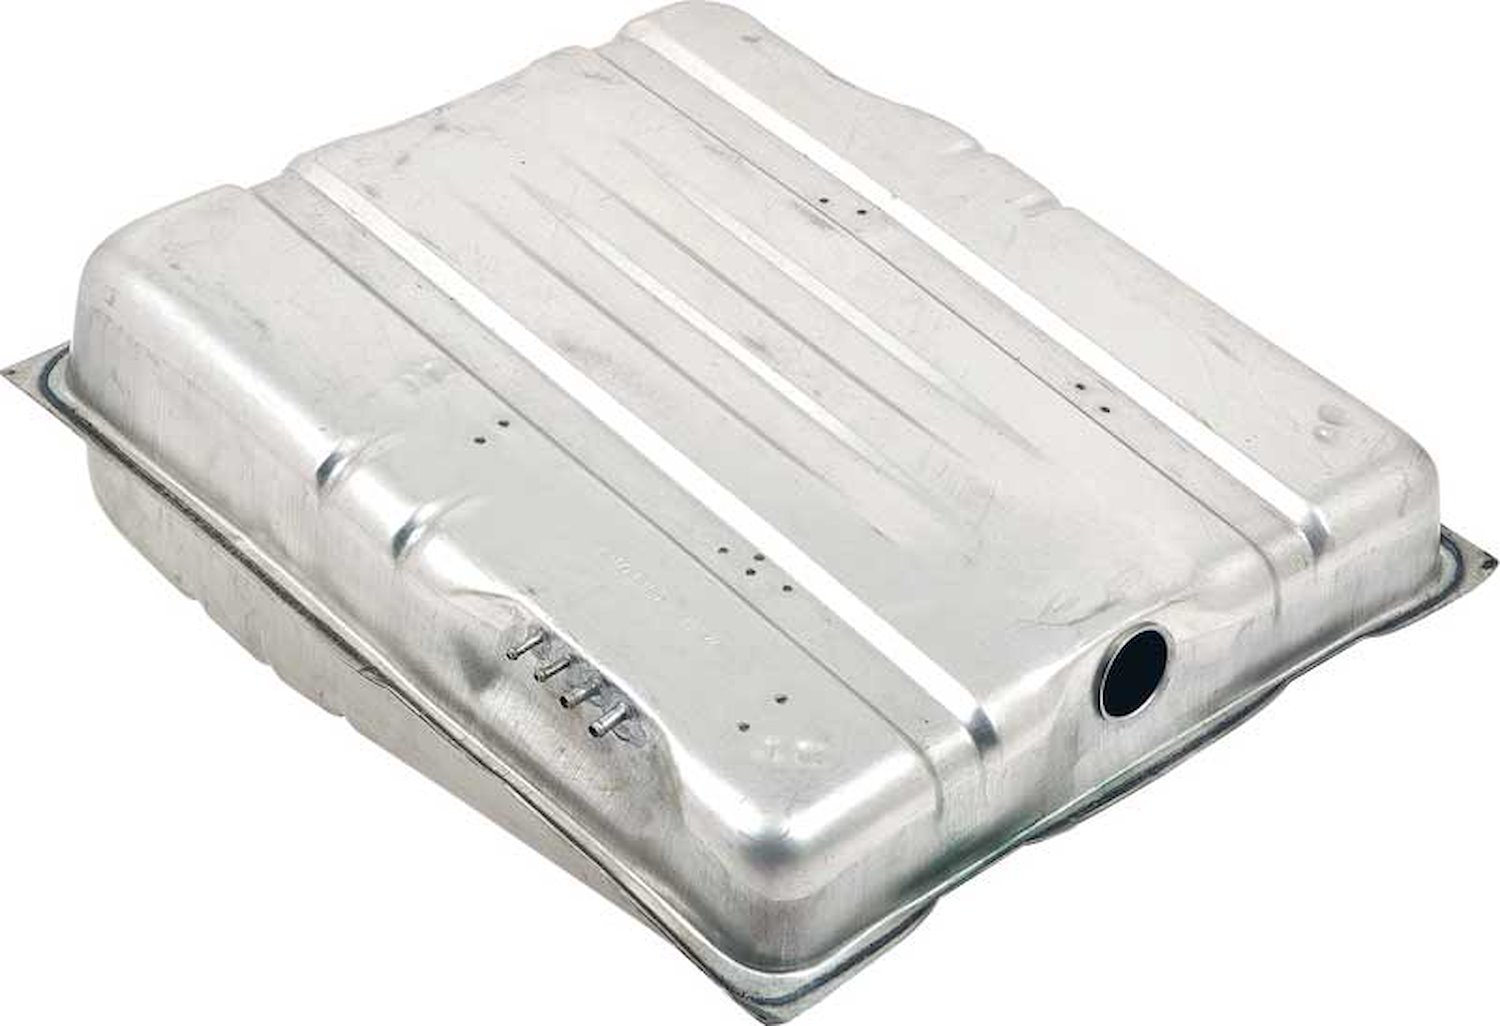 FT6013B Fuel Tank 1971-72 Charger, Coronet, GTX, Road Runner; Niterne Coated; 4 Side Vent Tubes; 19 Gallon